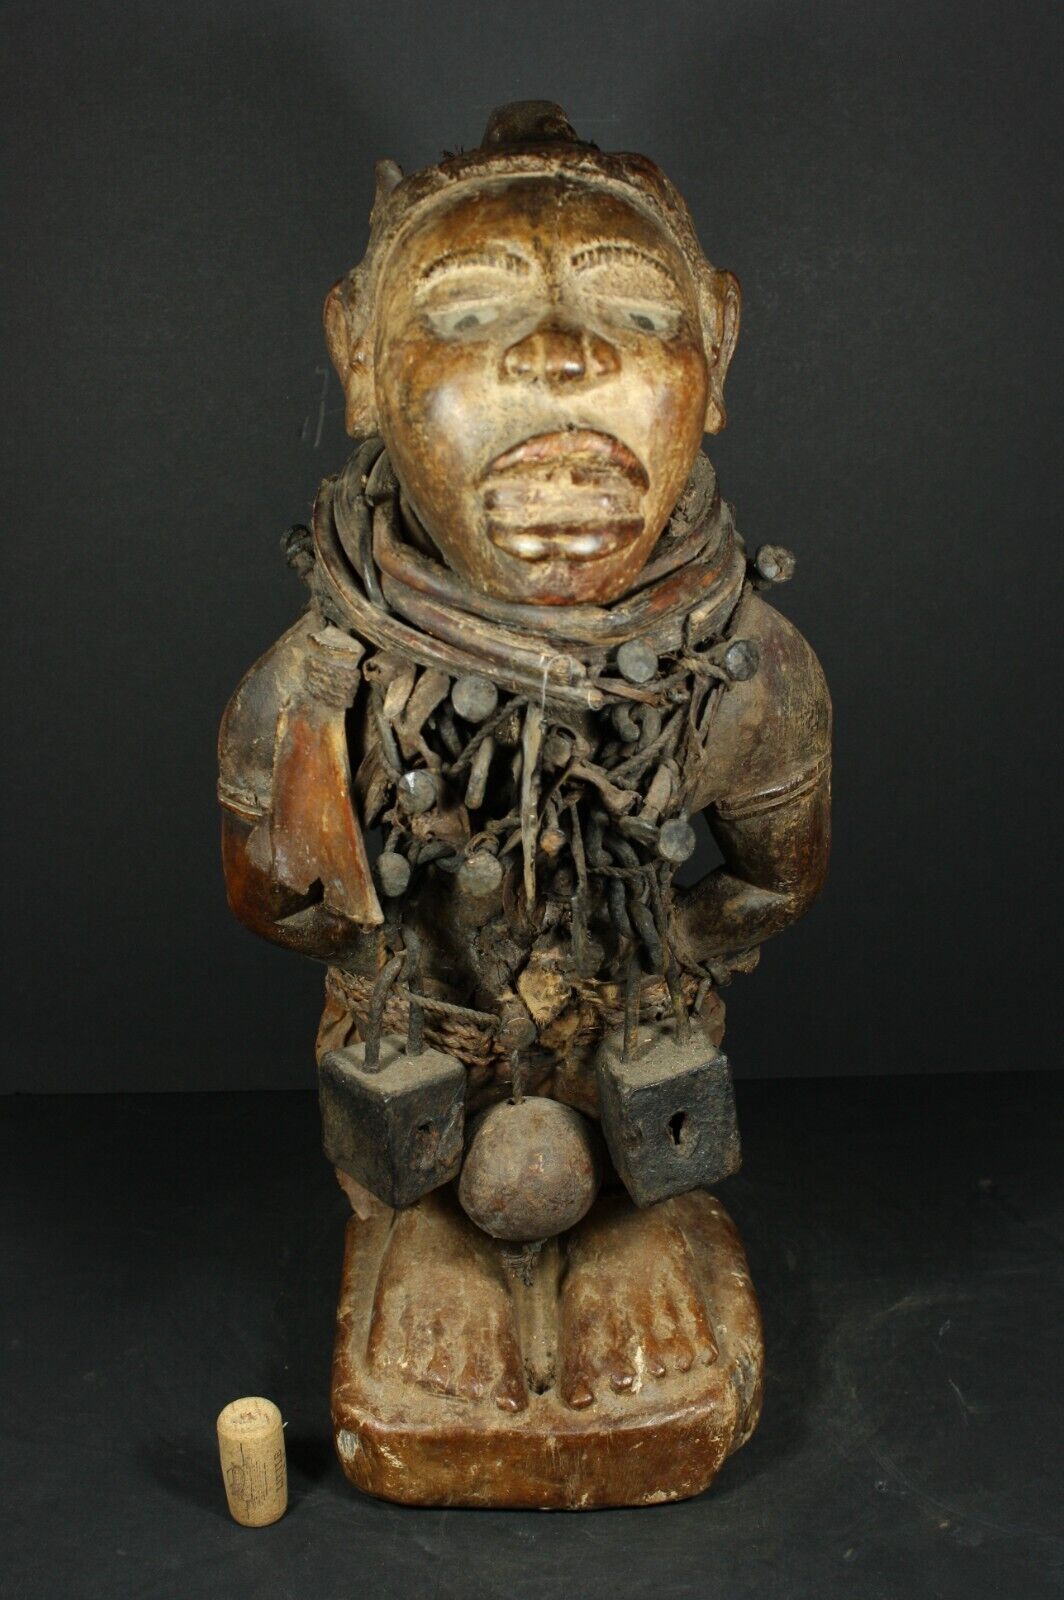 African Large Male NKISI Nail Fetish Statue - BACONGO DR.Congo TRIBAL ART CRAFTS